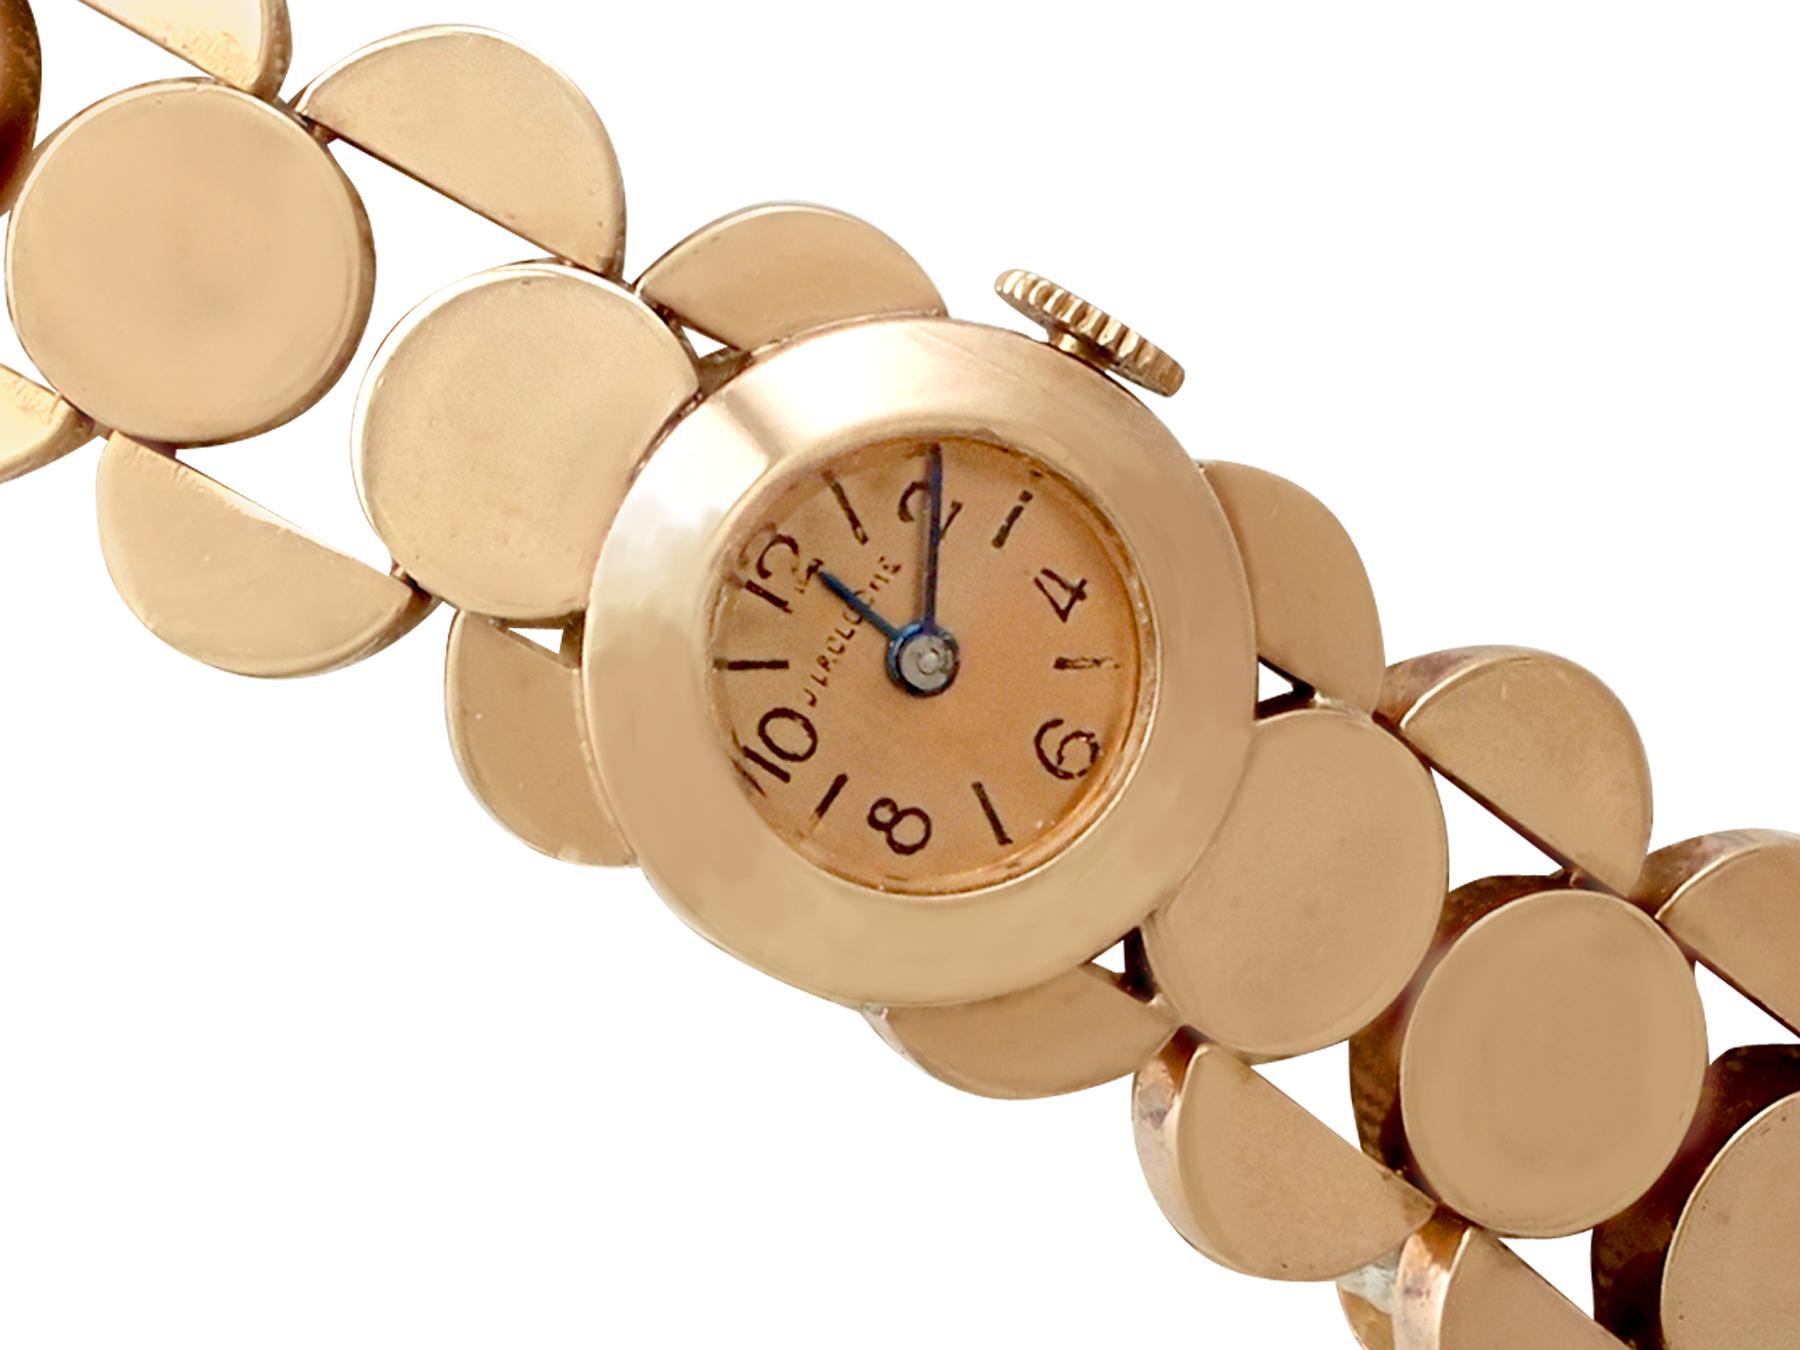 A fine, impressive and exceptional antique La Cloche ladies watch in 18k rose gold; part of our authentic and collectable vintage watch range for ladies and gents.

This fine and exceptional antique La Cloche ladies watch has been crafted in 18k